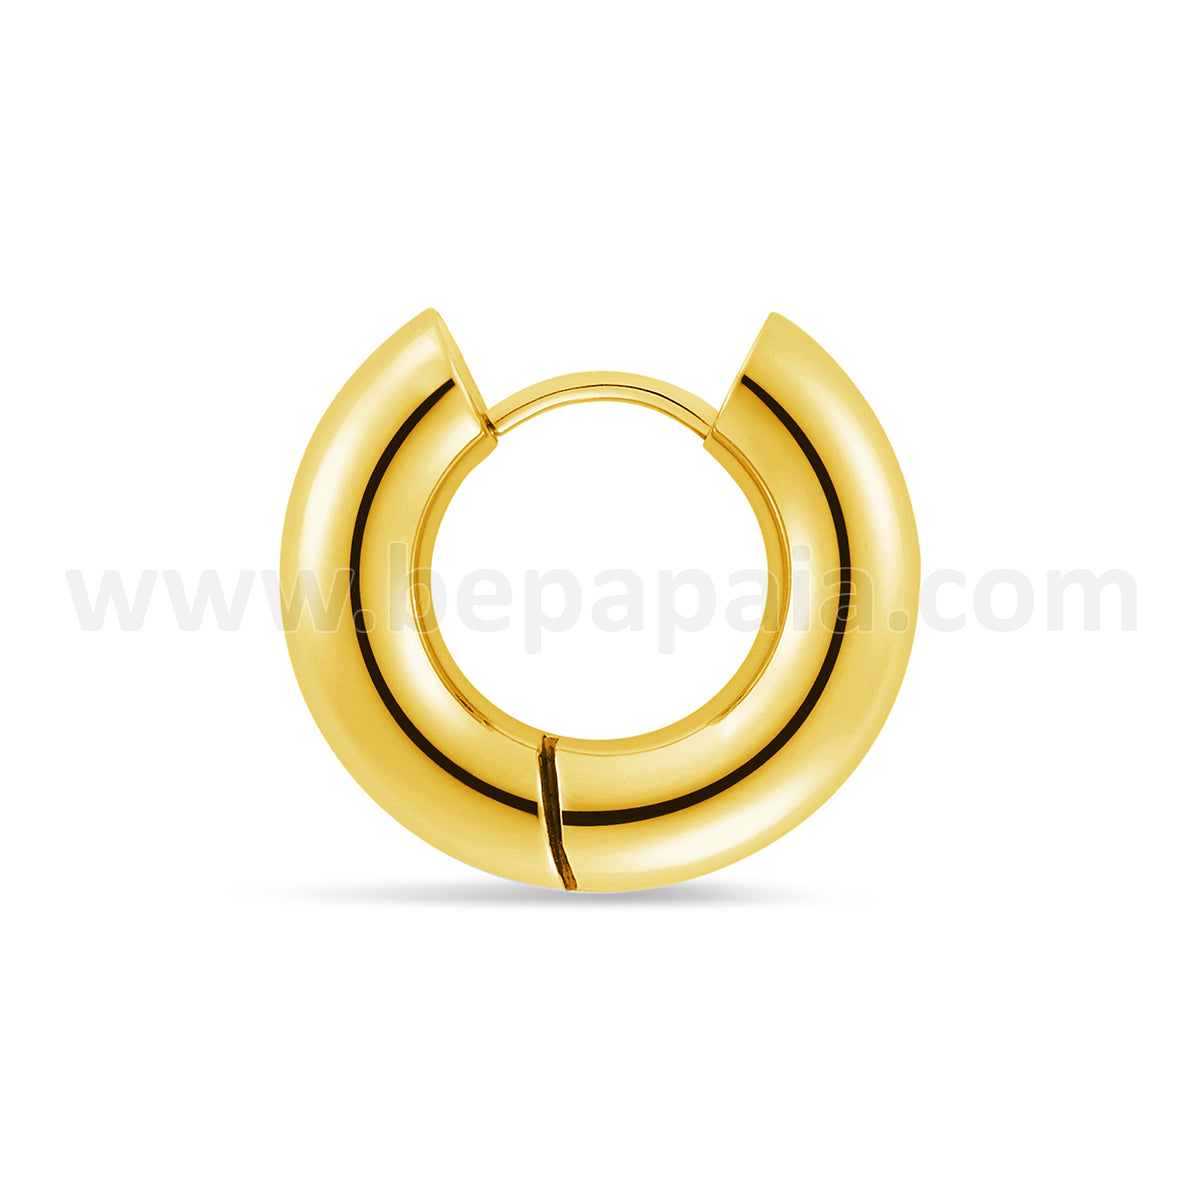 Stainless steel gold colour hoop earring 4 & 5 mm